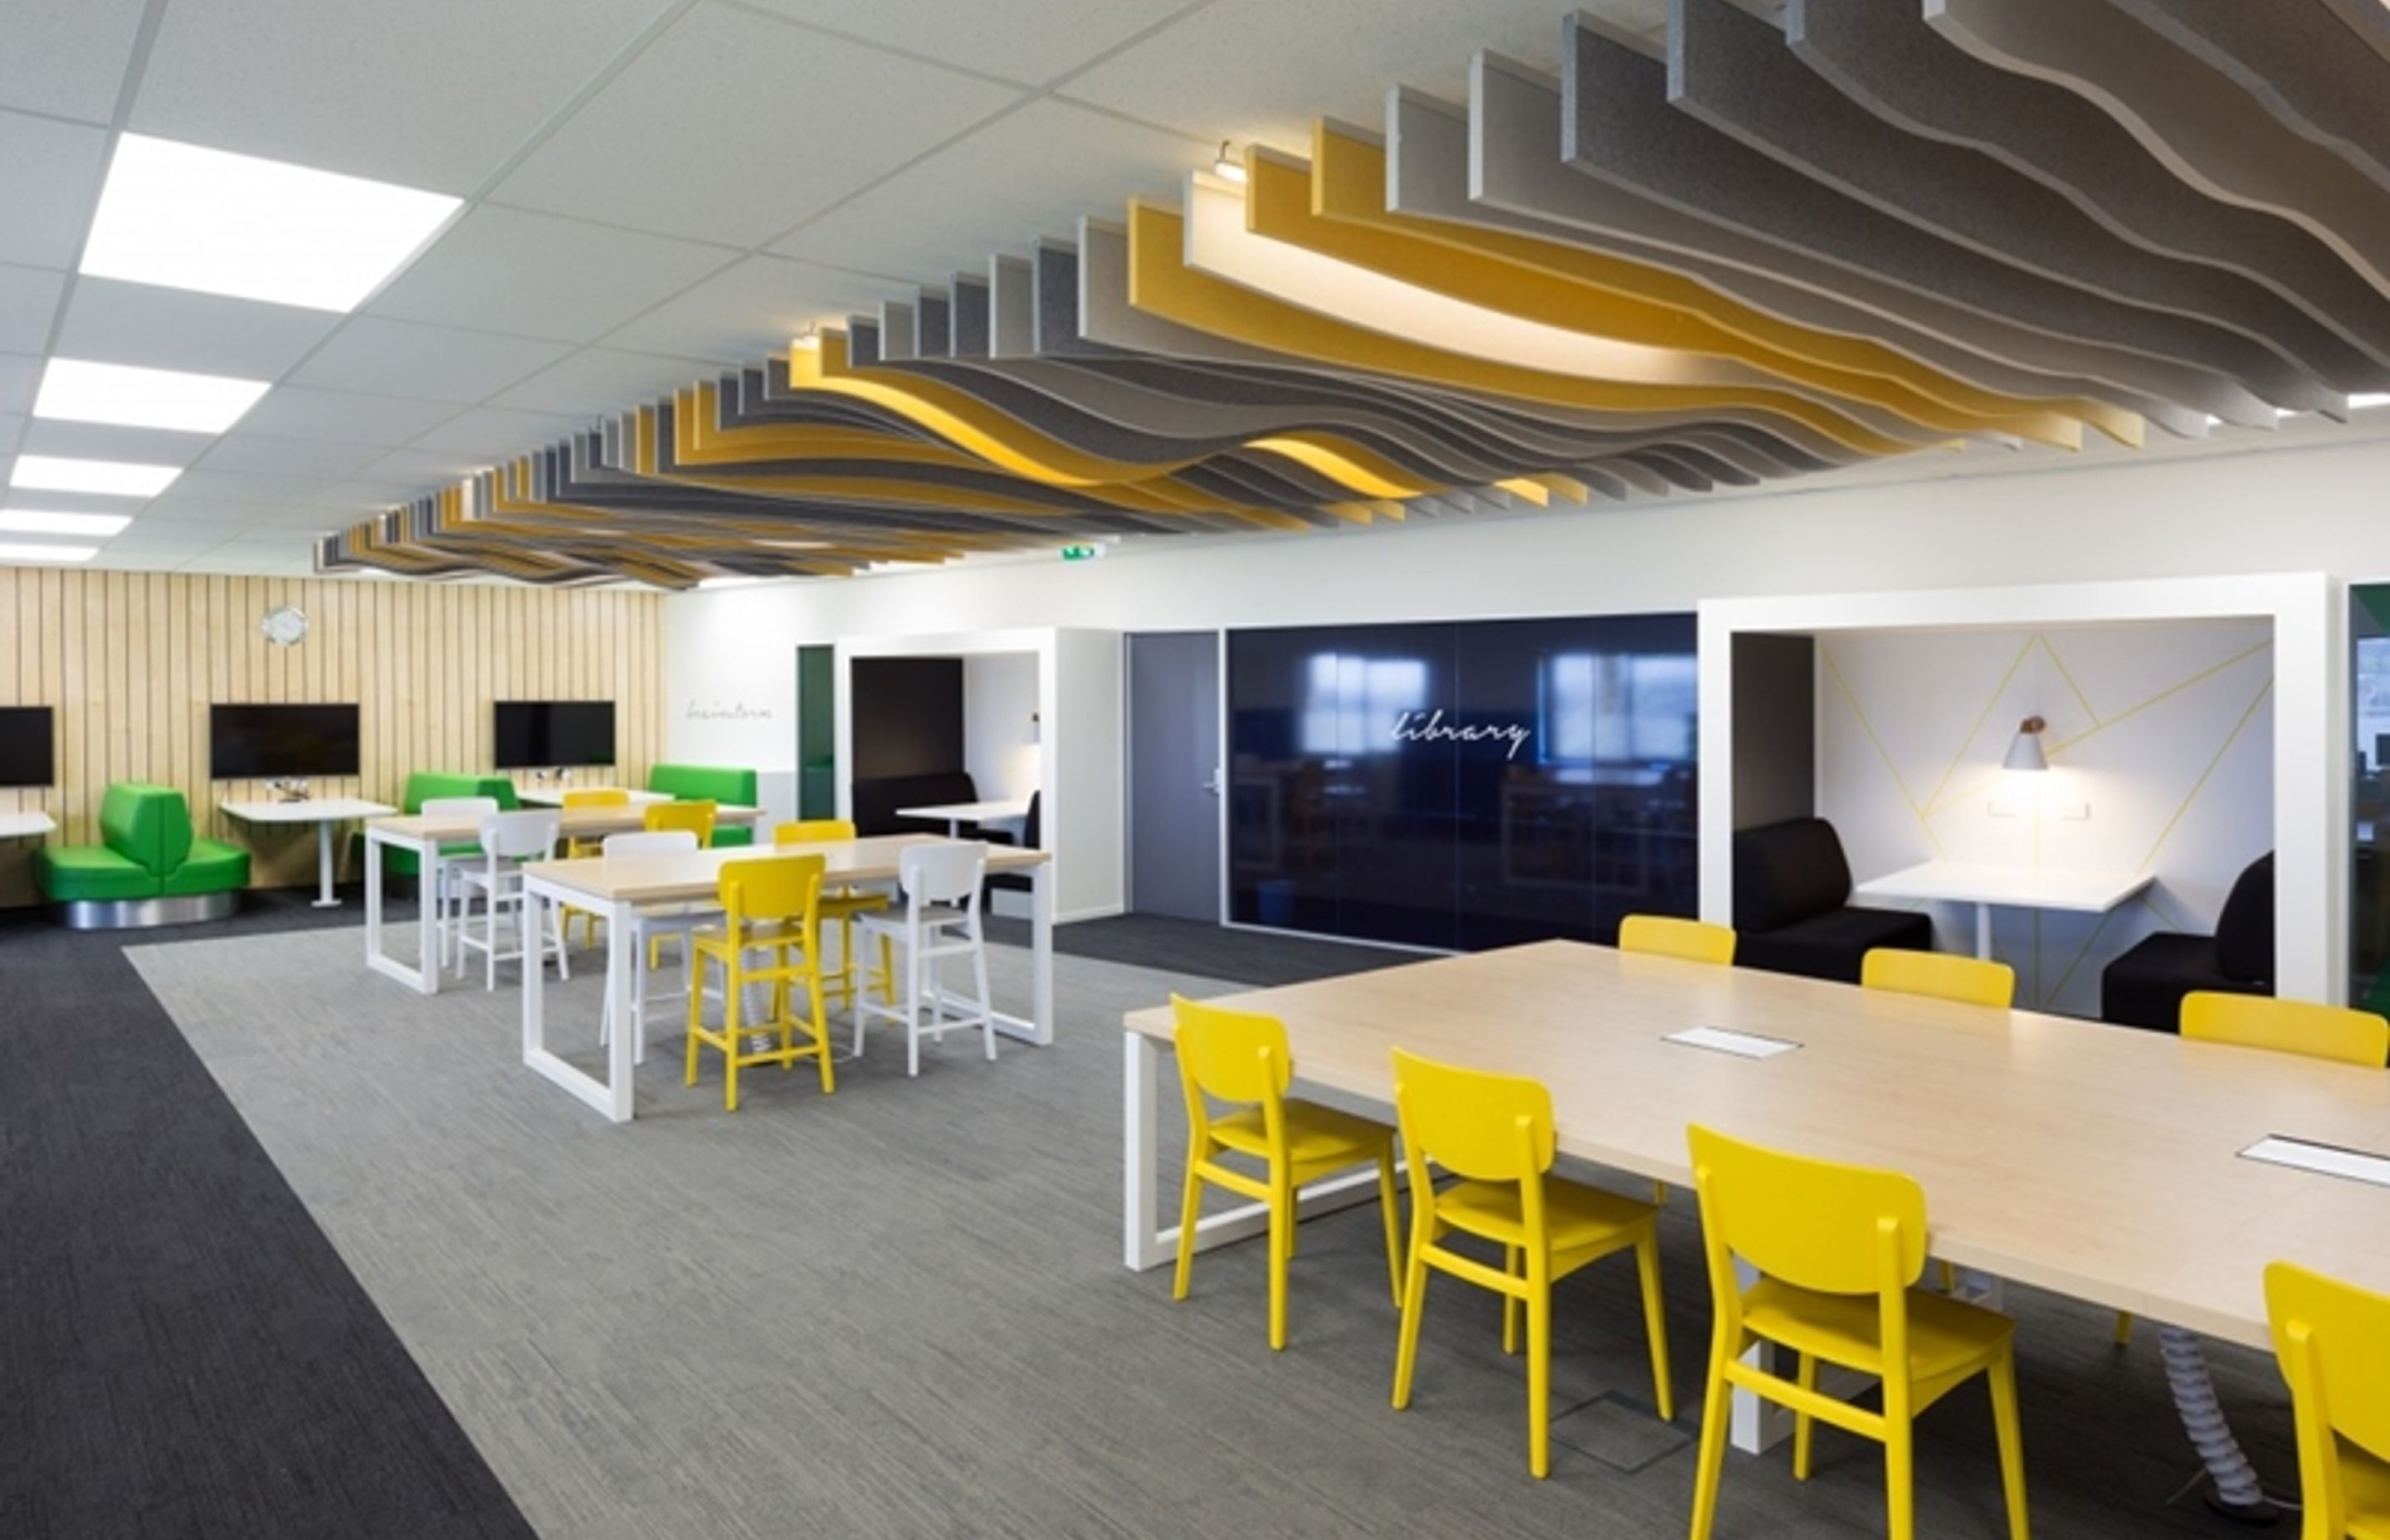 Autex's rippling wave acoustic installation at Westmount New Learning Centre is an artform.